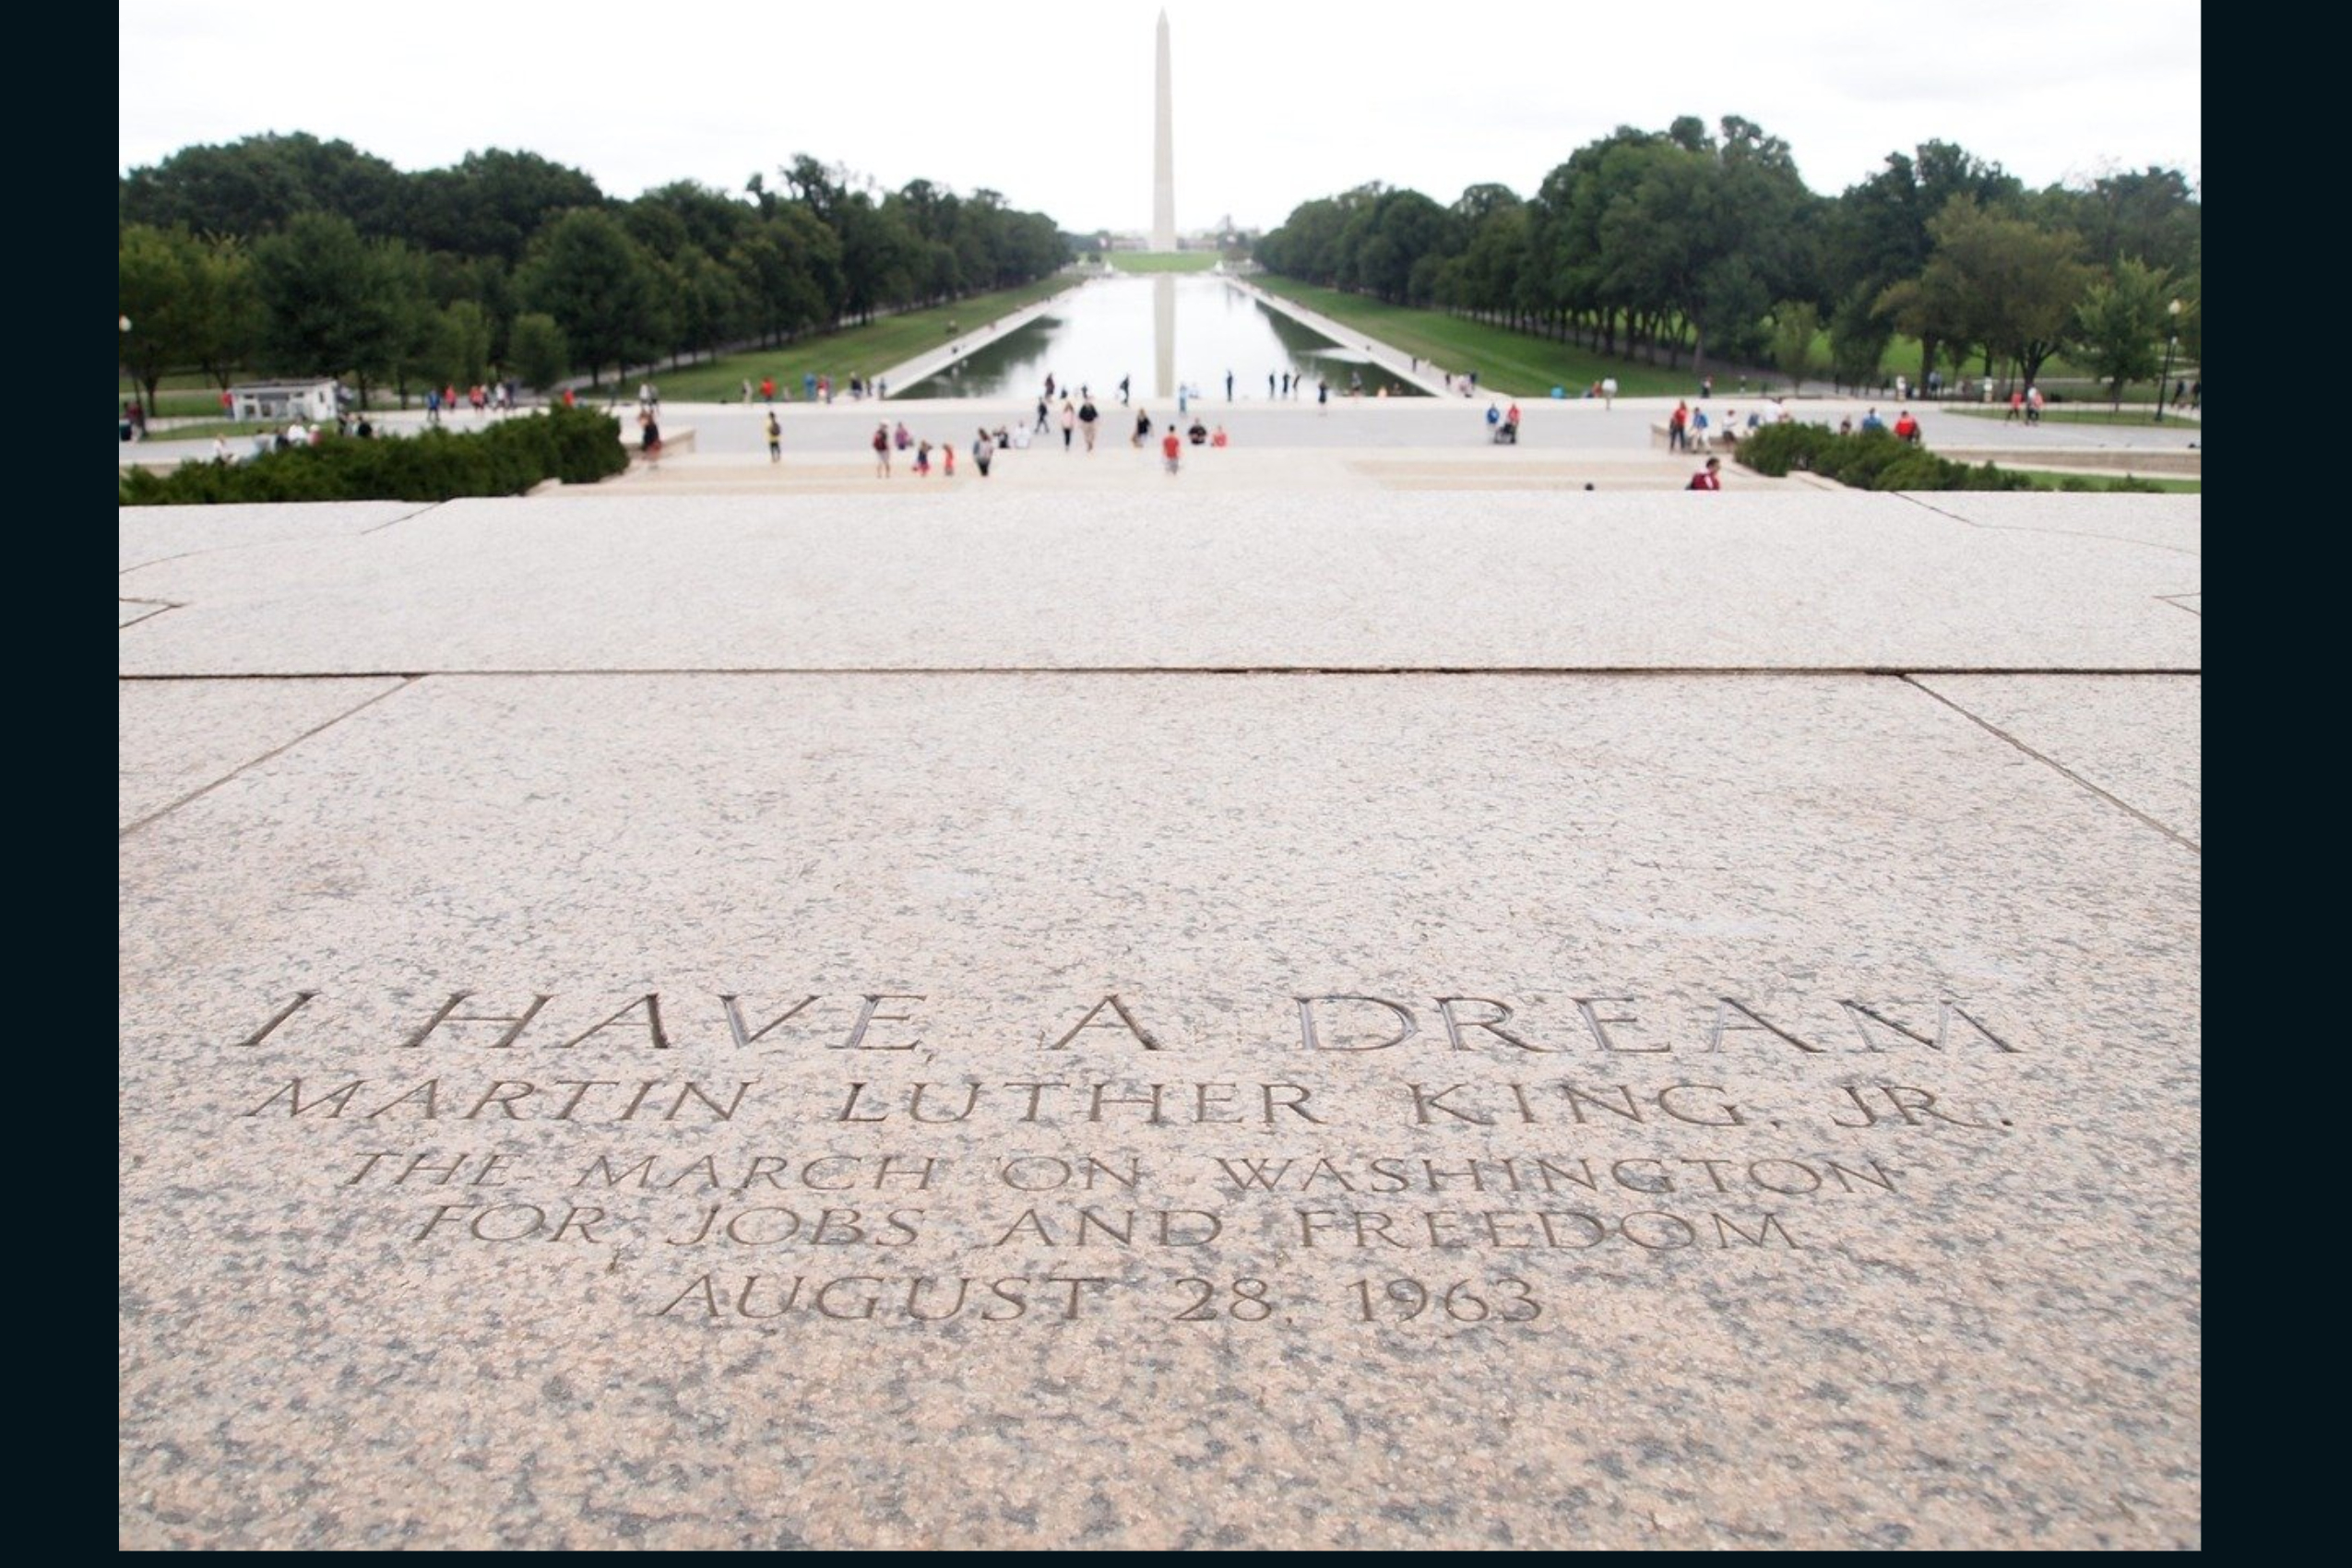 martin luther king i have a dream speech lincoln memorial